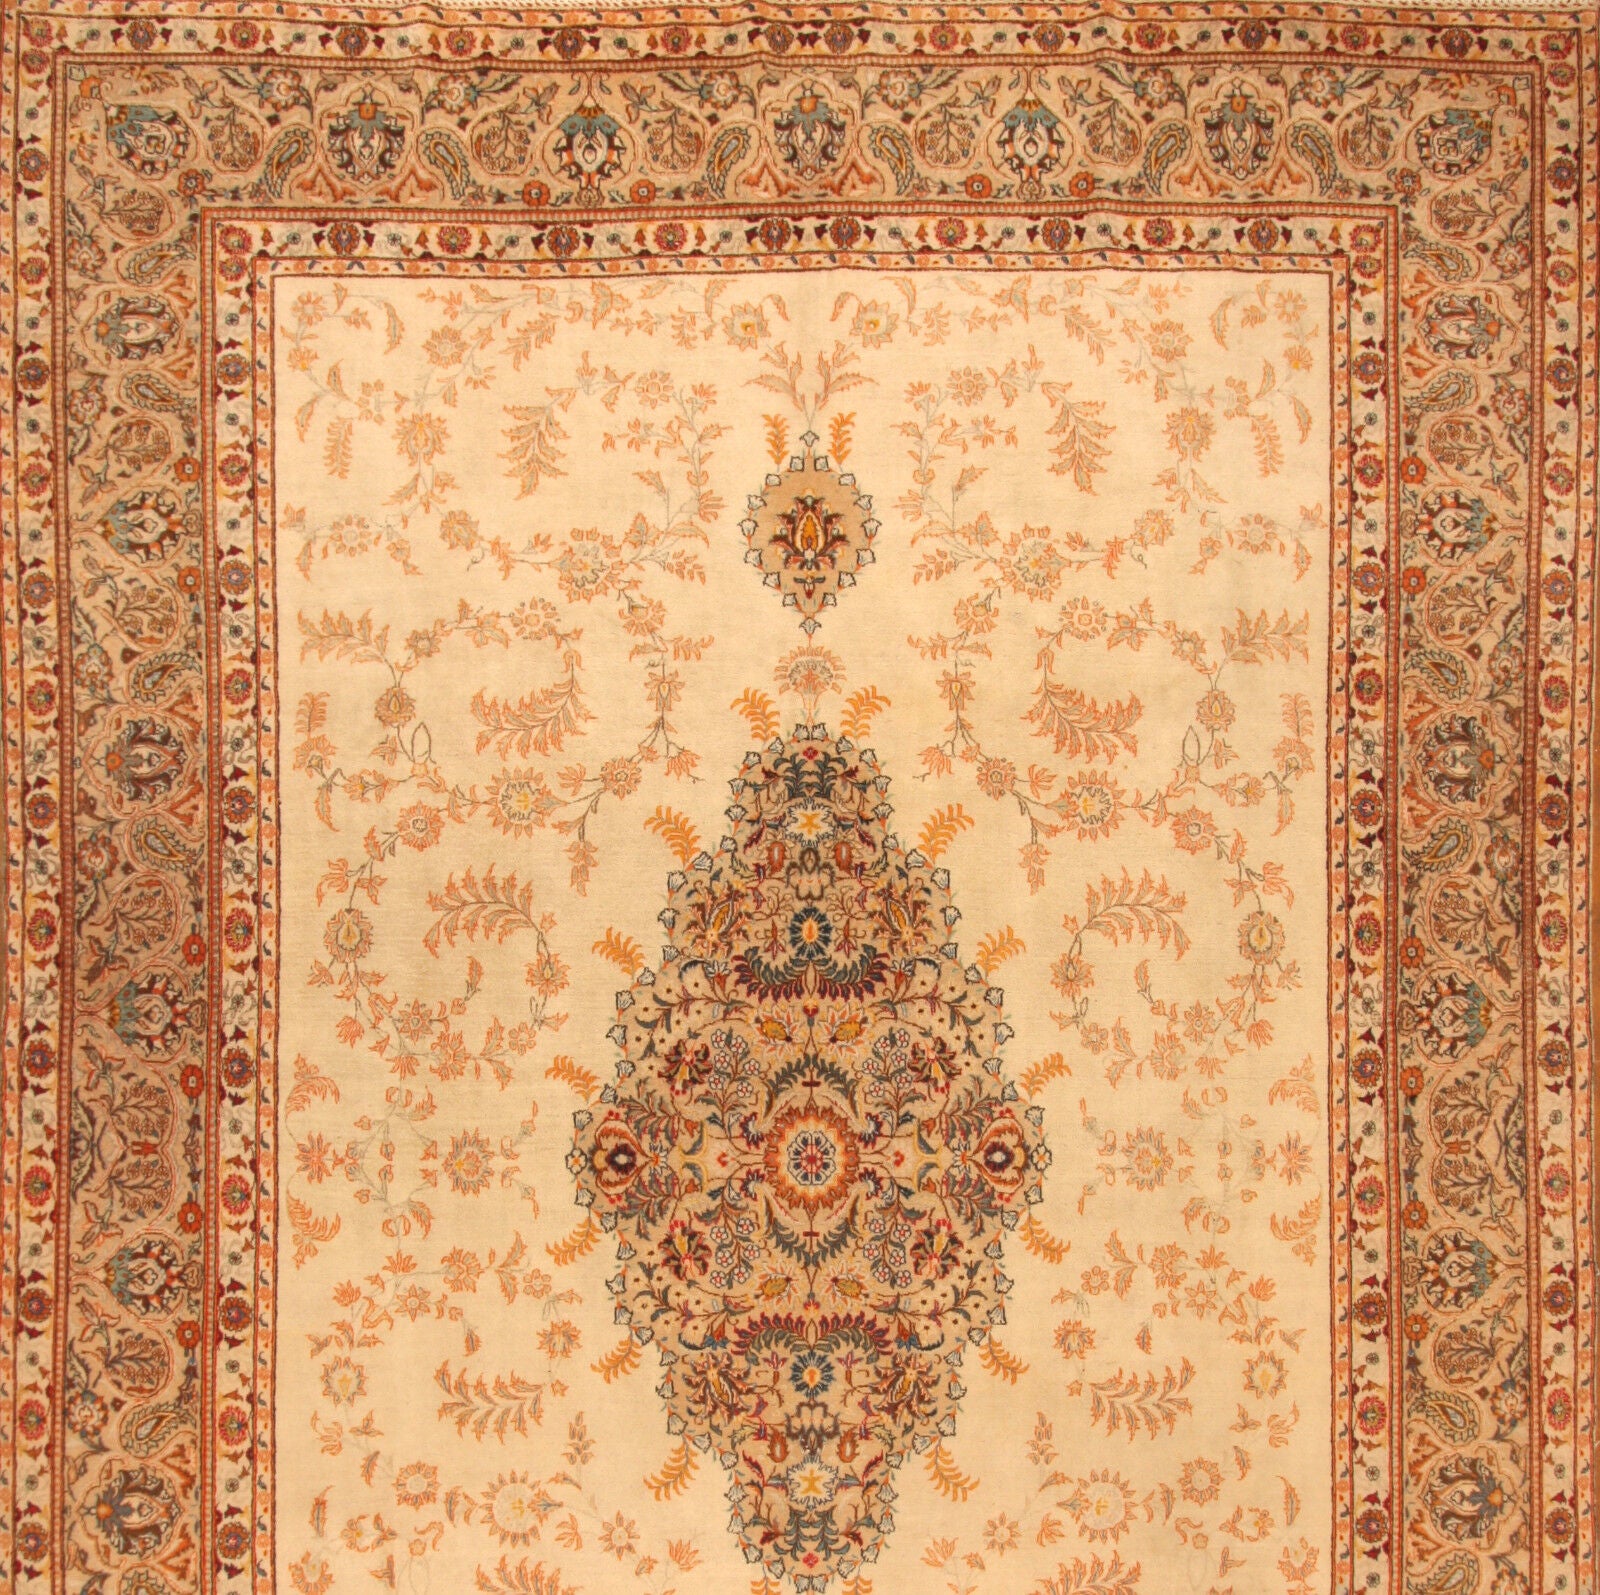 Artistic display of the Handmade Contemporary Persian Style Tabriz Rug as a room centerpiece